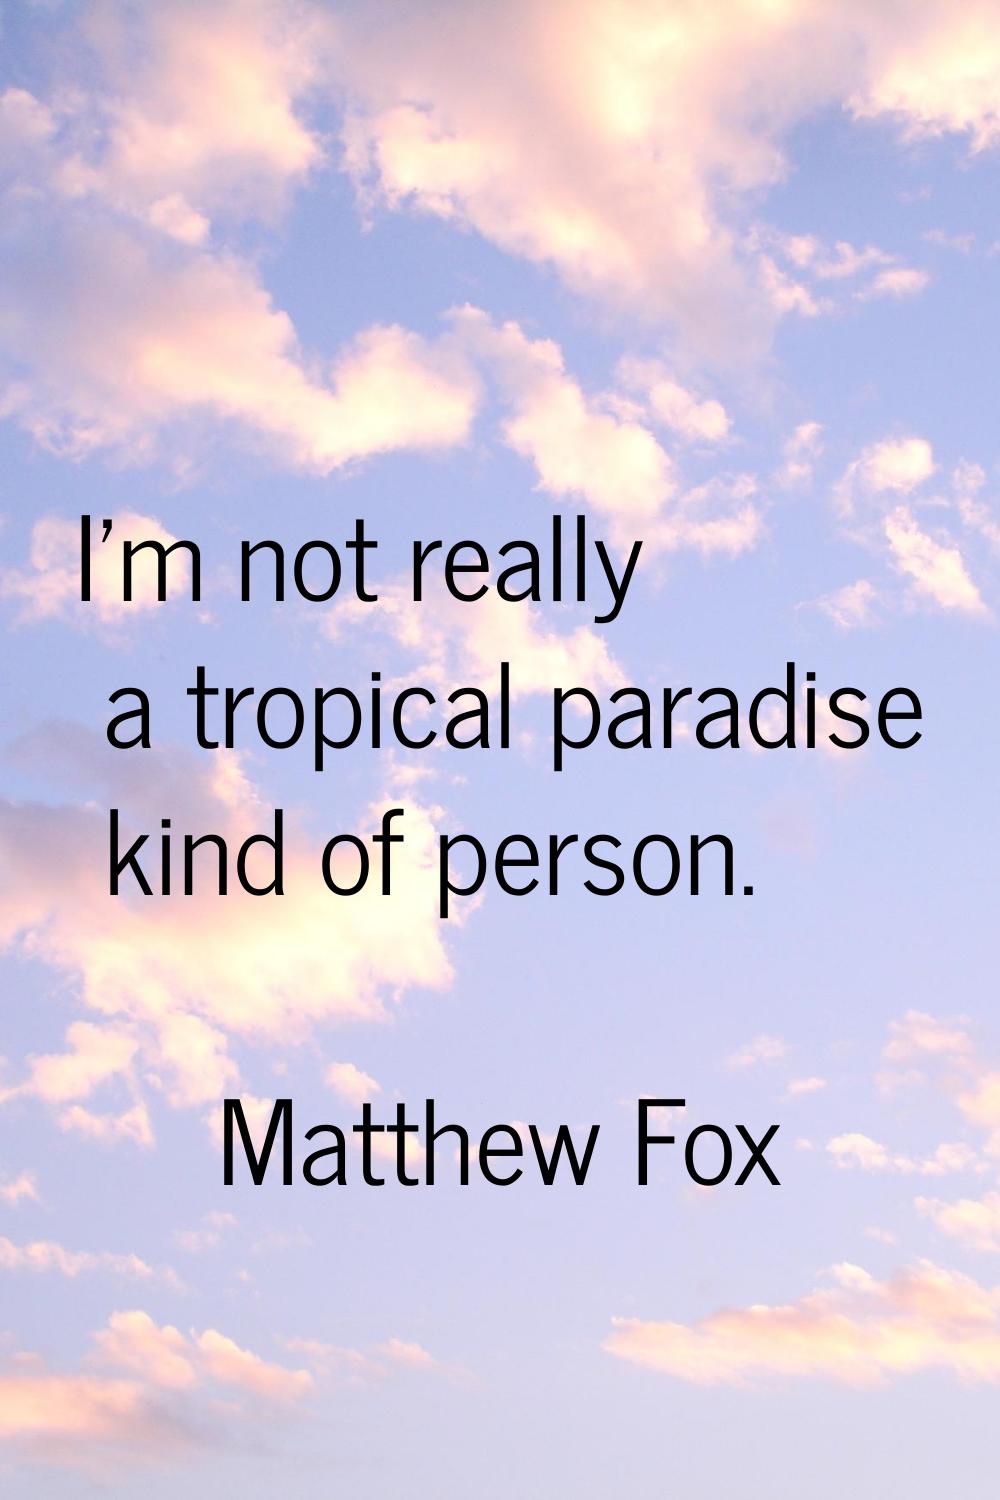 I'm not really a tropical paradise kind of person.